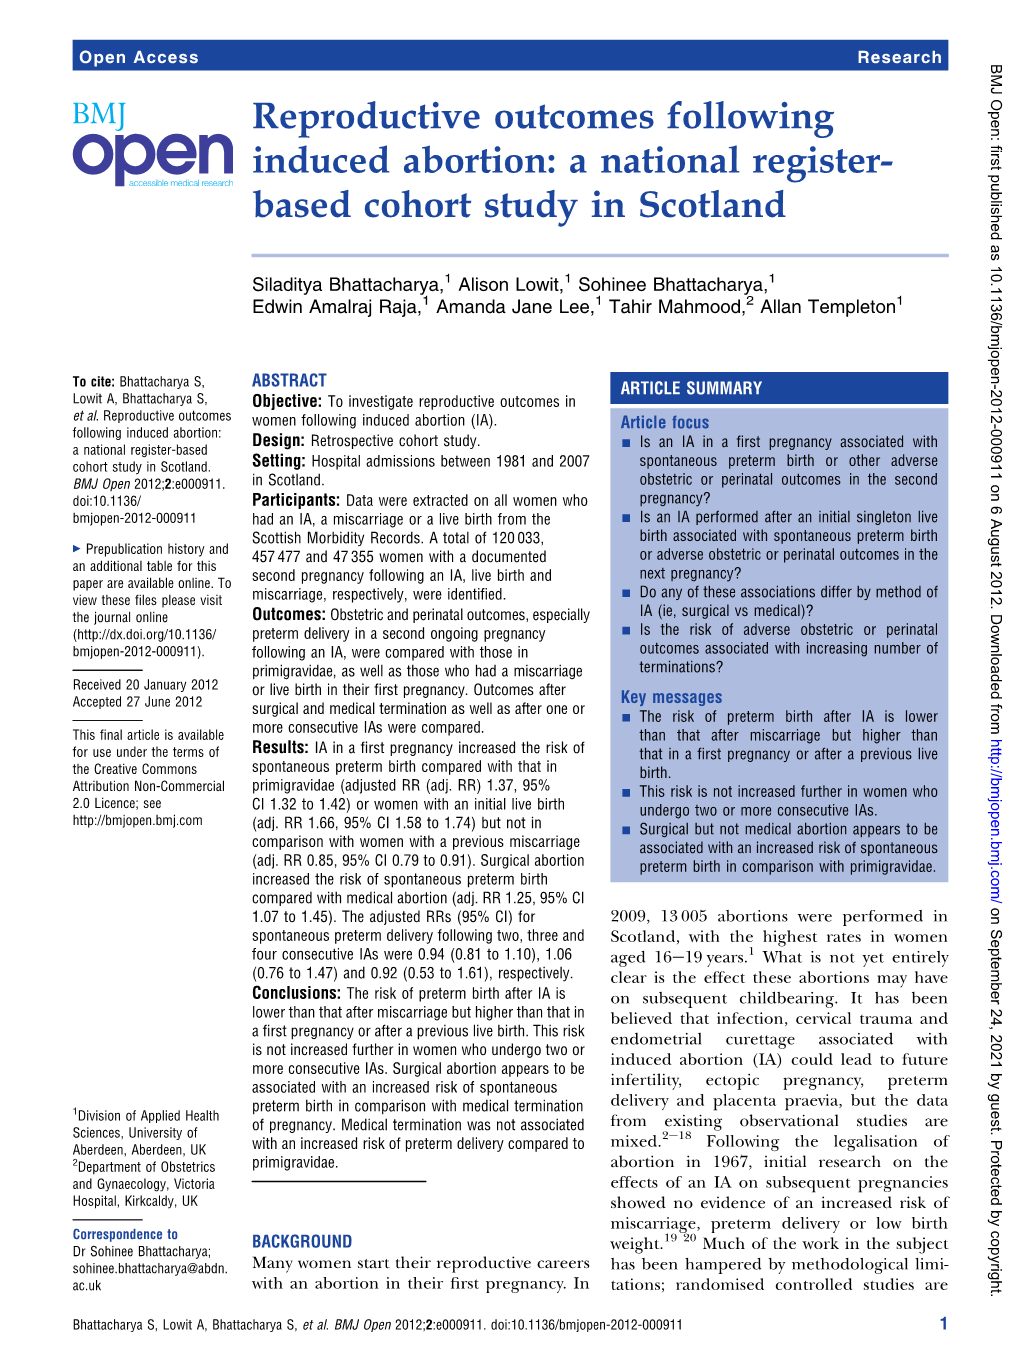 Reproductive Outcomes Following Induced Abortion: a National Register- Based Cohort Study in Scotland